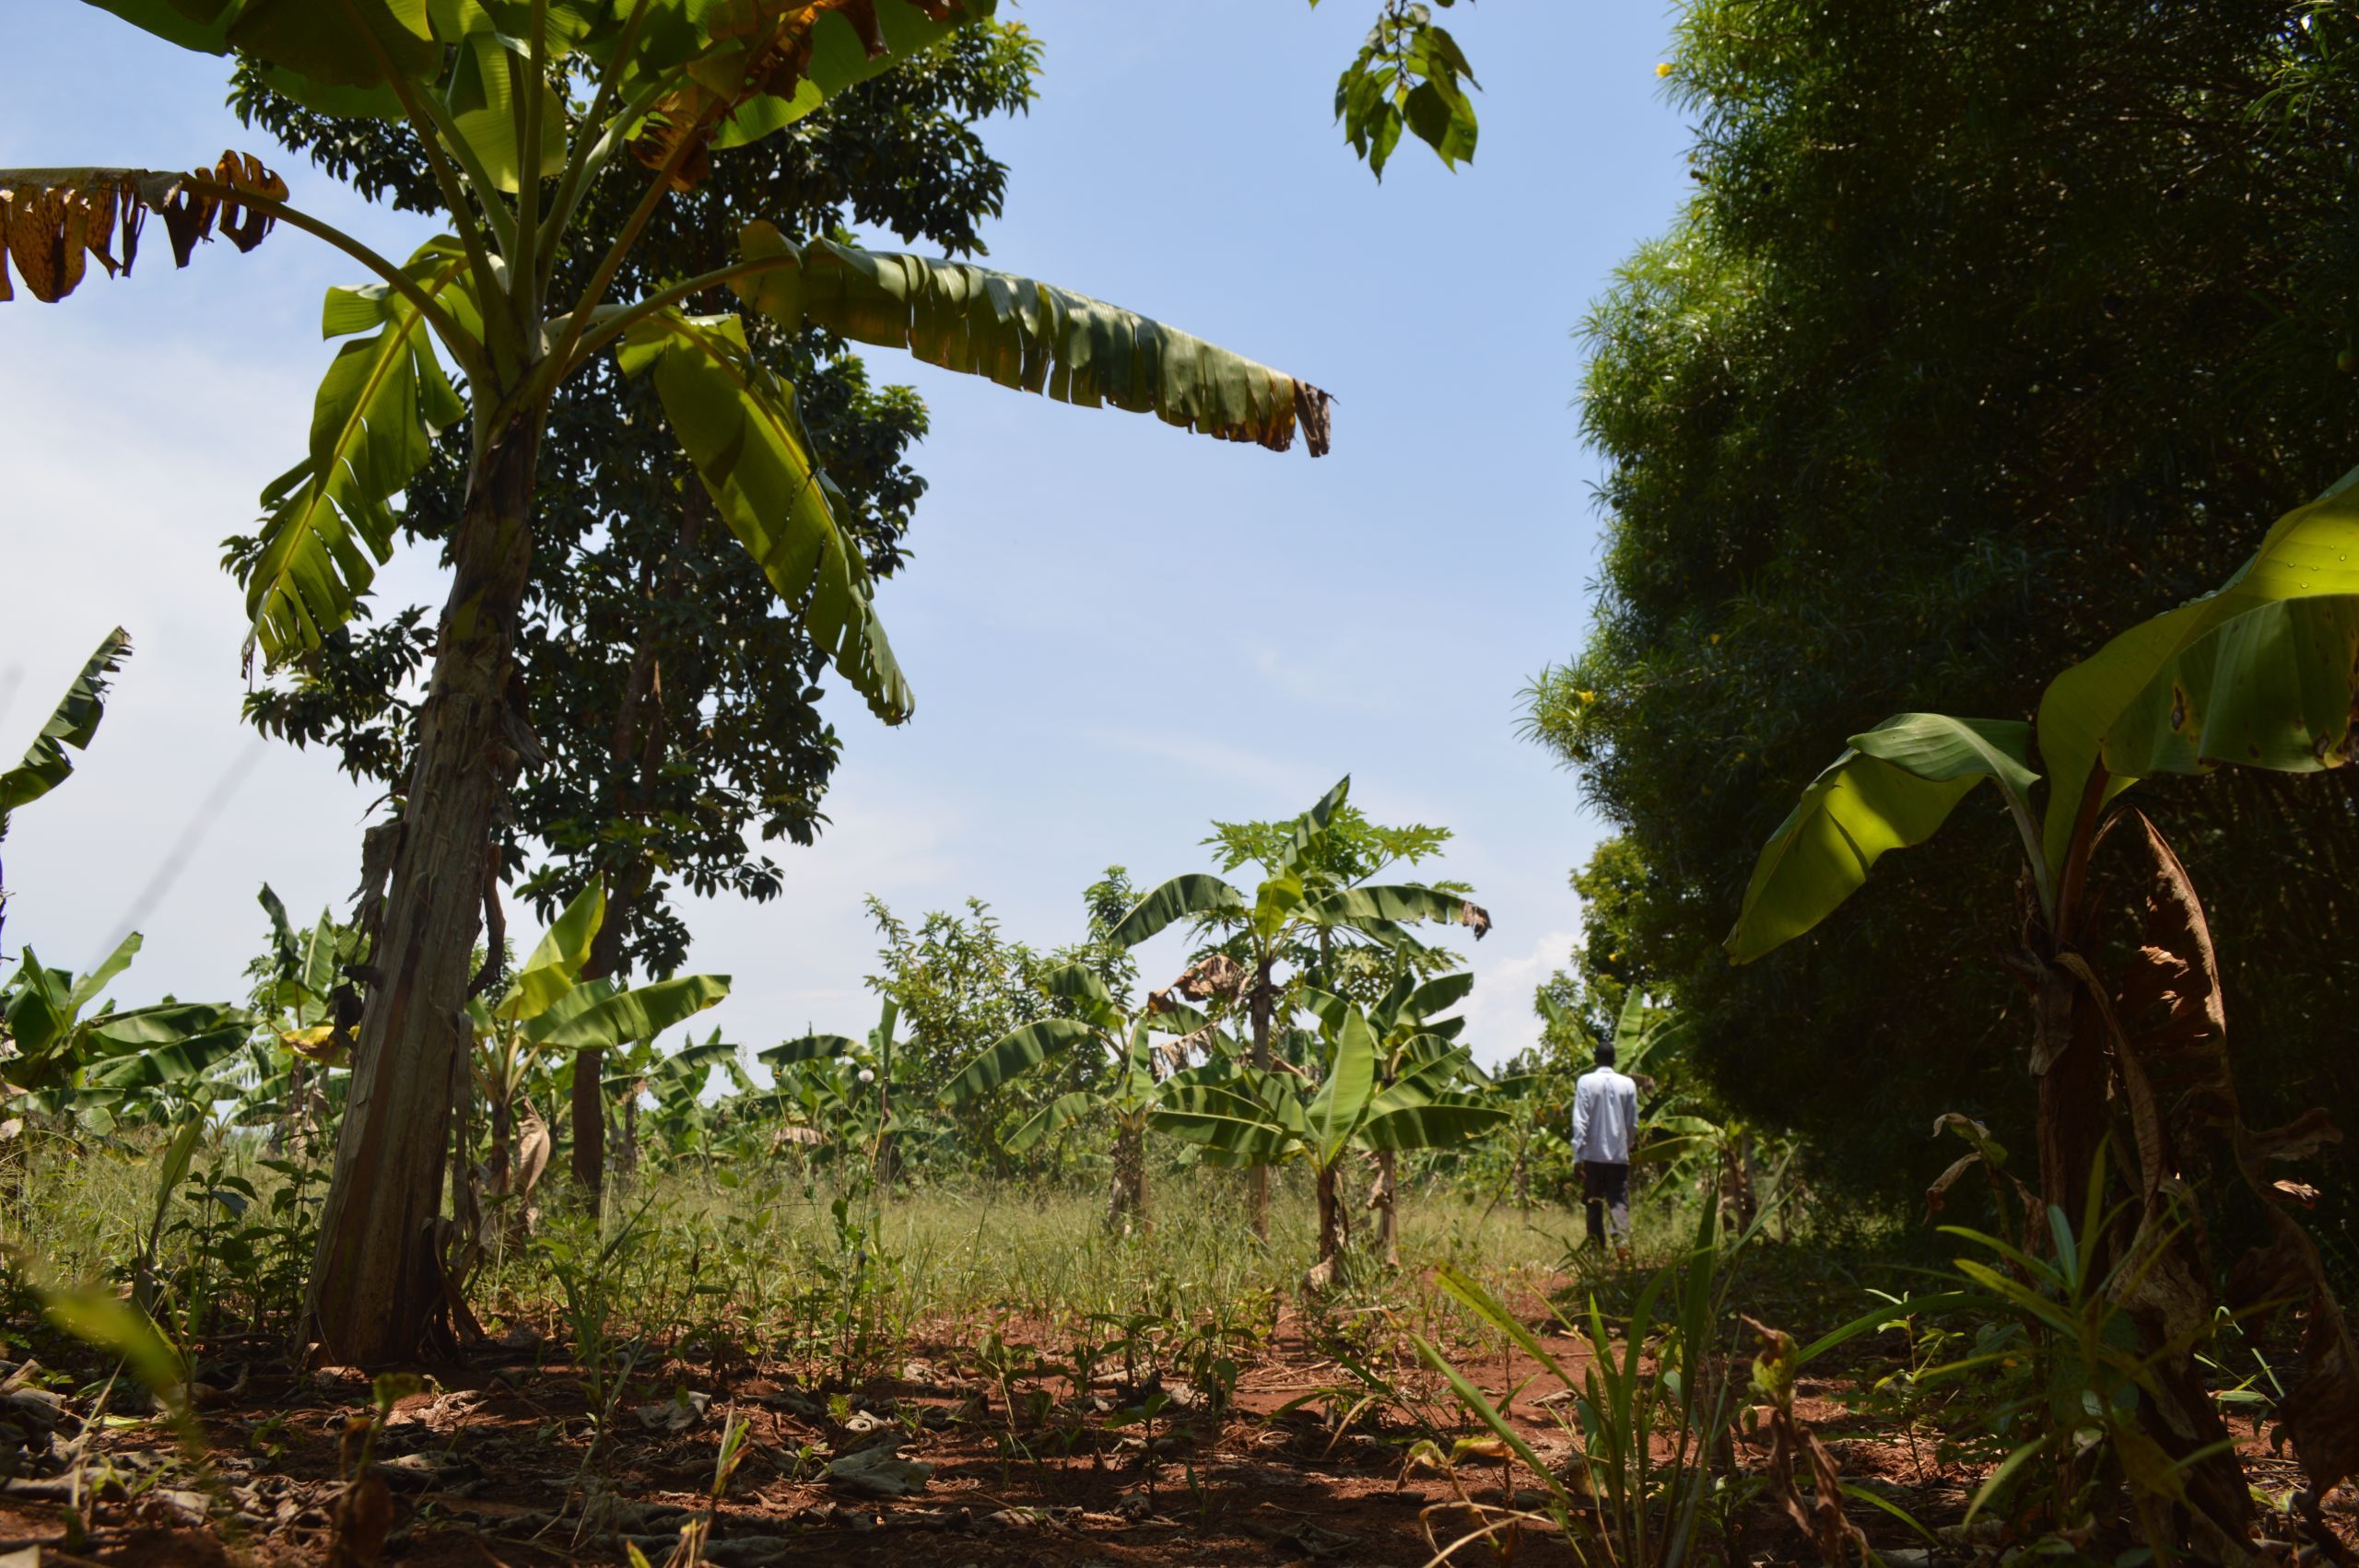 A garden owned by a Walumbe resident in the buffer zone between Lake Victoria and the forest plantation. Image by Annika McGinnis. Uganda, 2019.